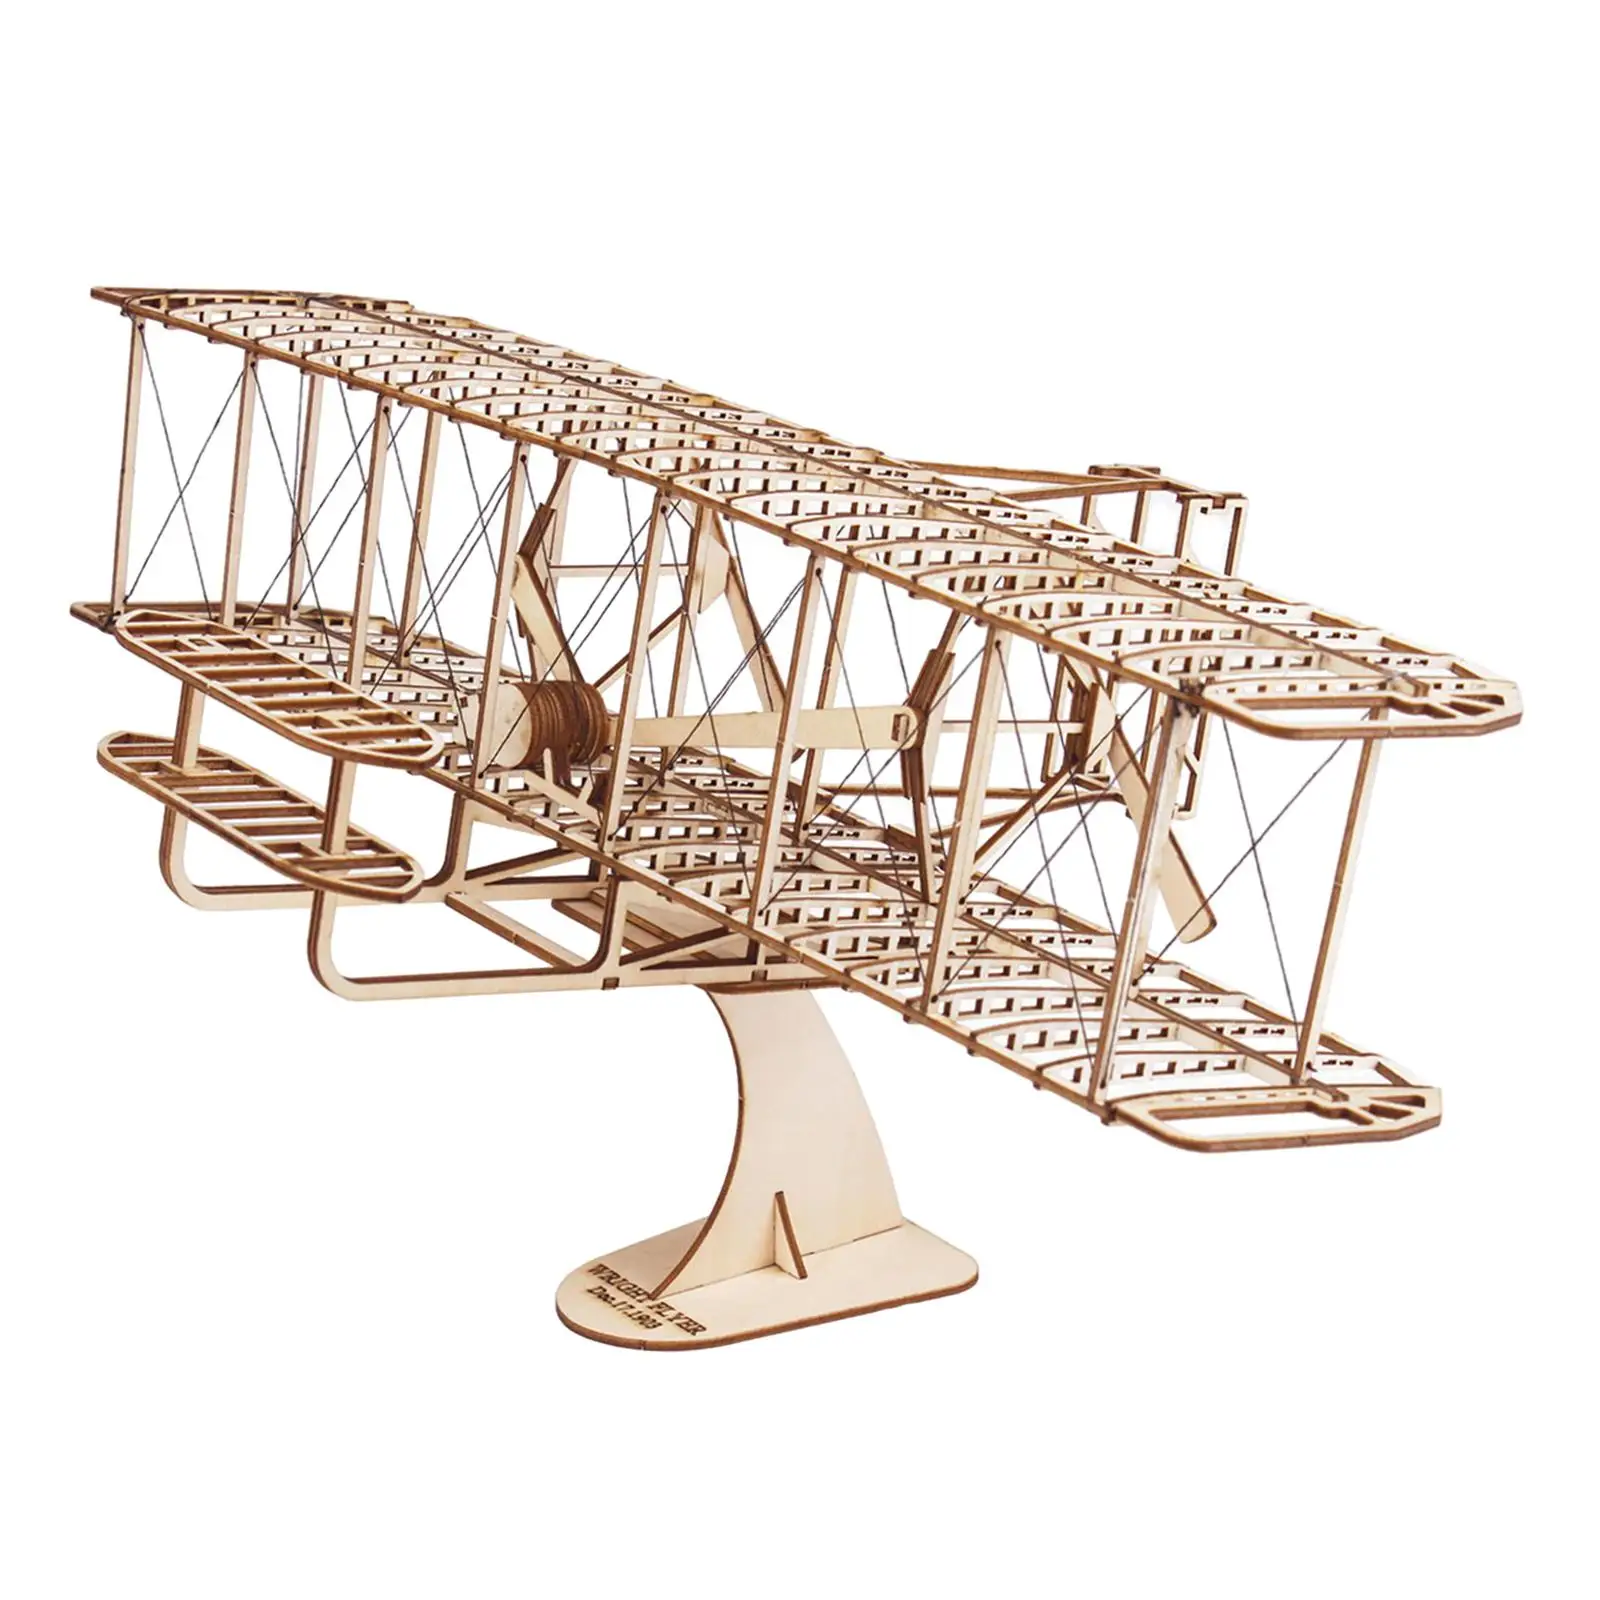 

Wooden Airplane Model Stem Toys Handcraft Aircraft Model Collectible Plane 3D Wooden Biplane Ornament Vintage Airplane Decor